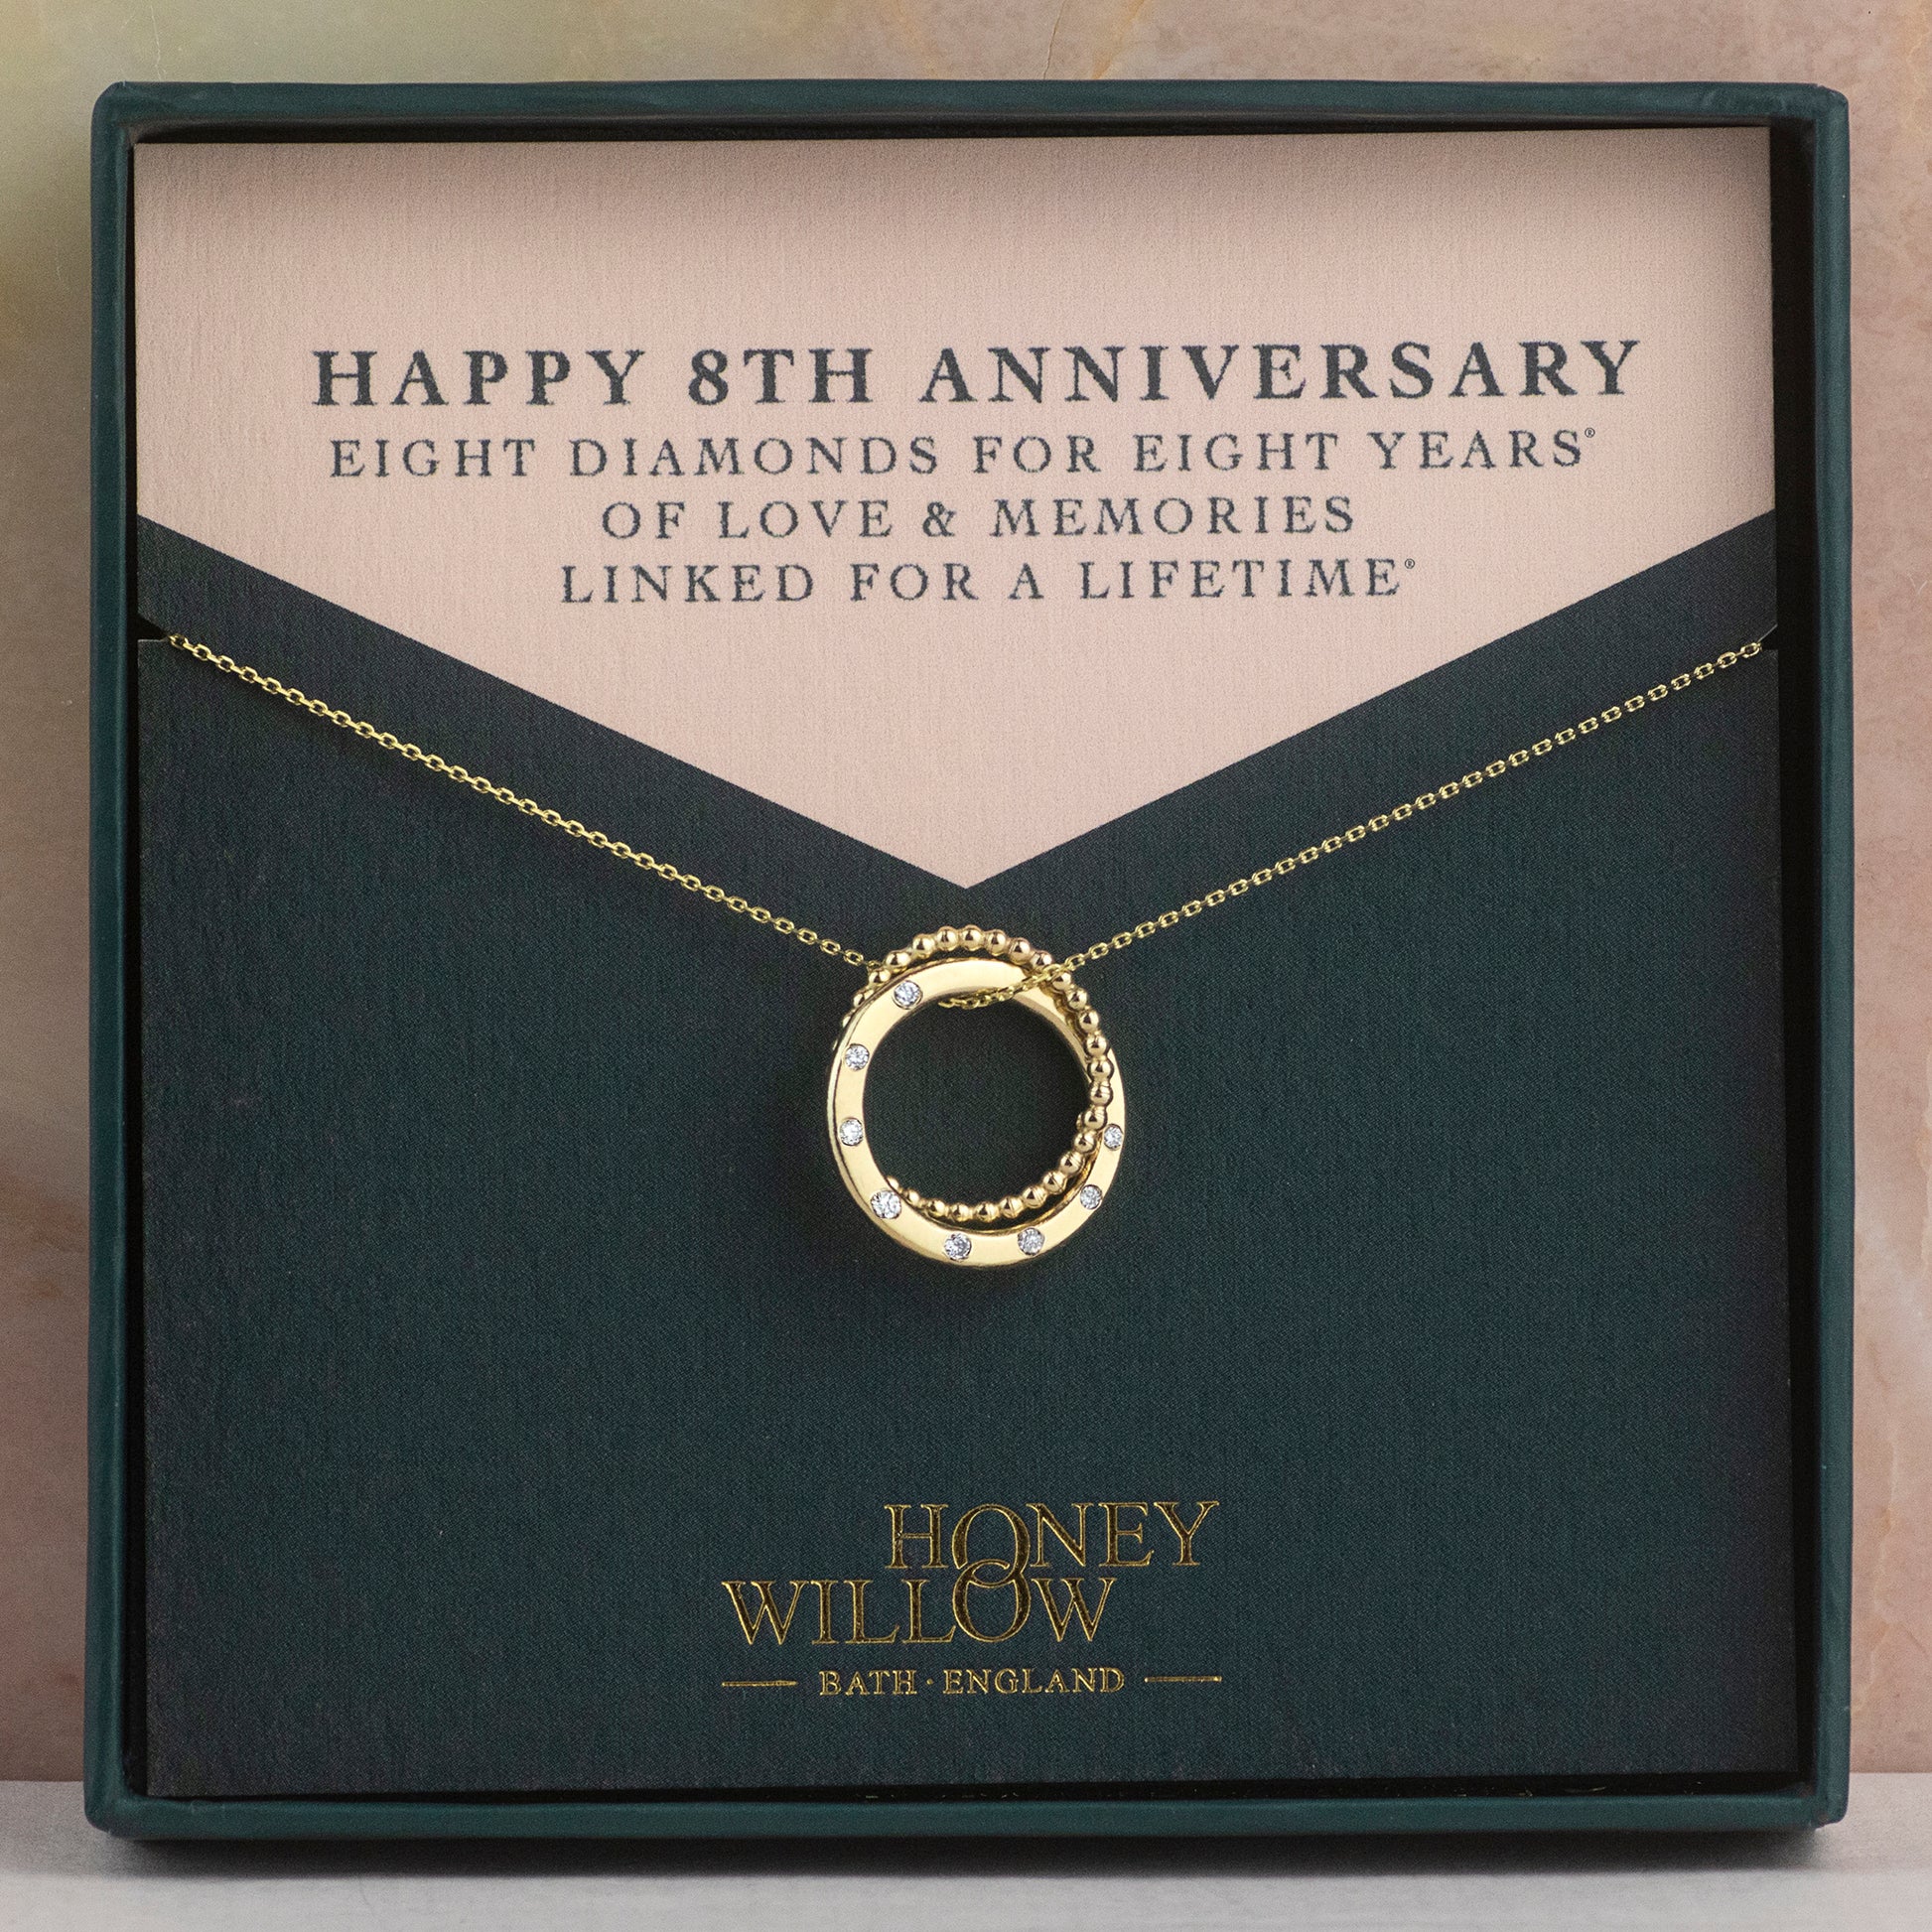 8th Anniversary Necklace - 8 Diamonds for 8 Years - 9kt Gold